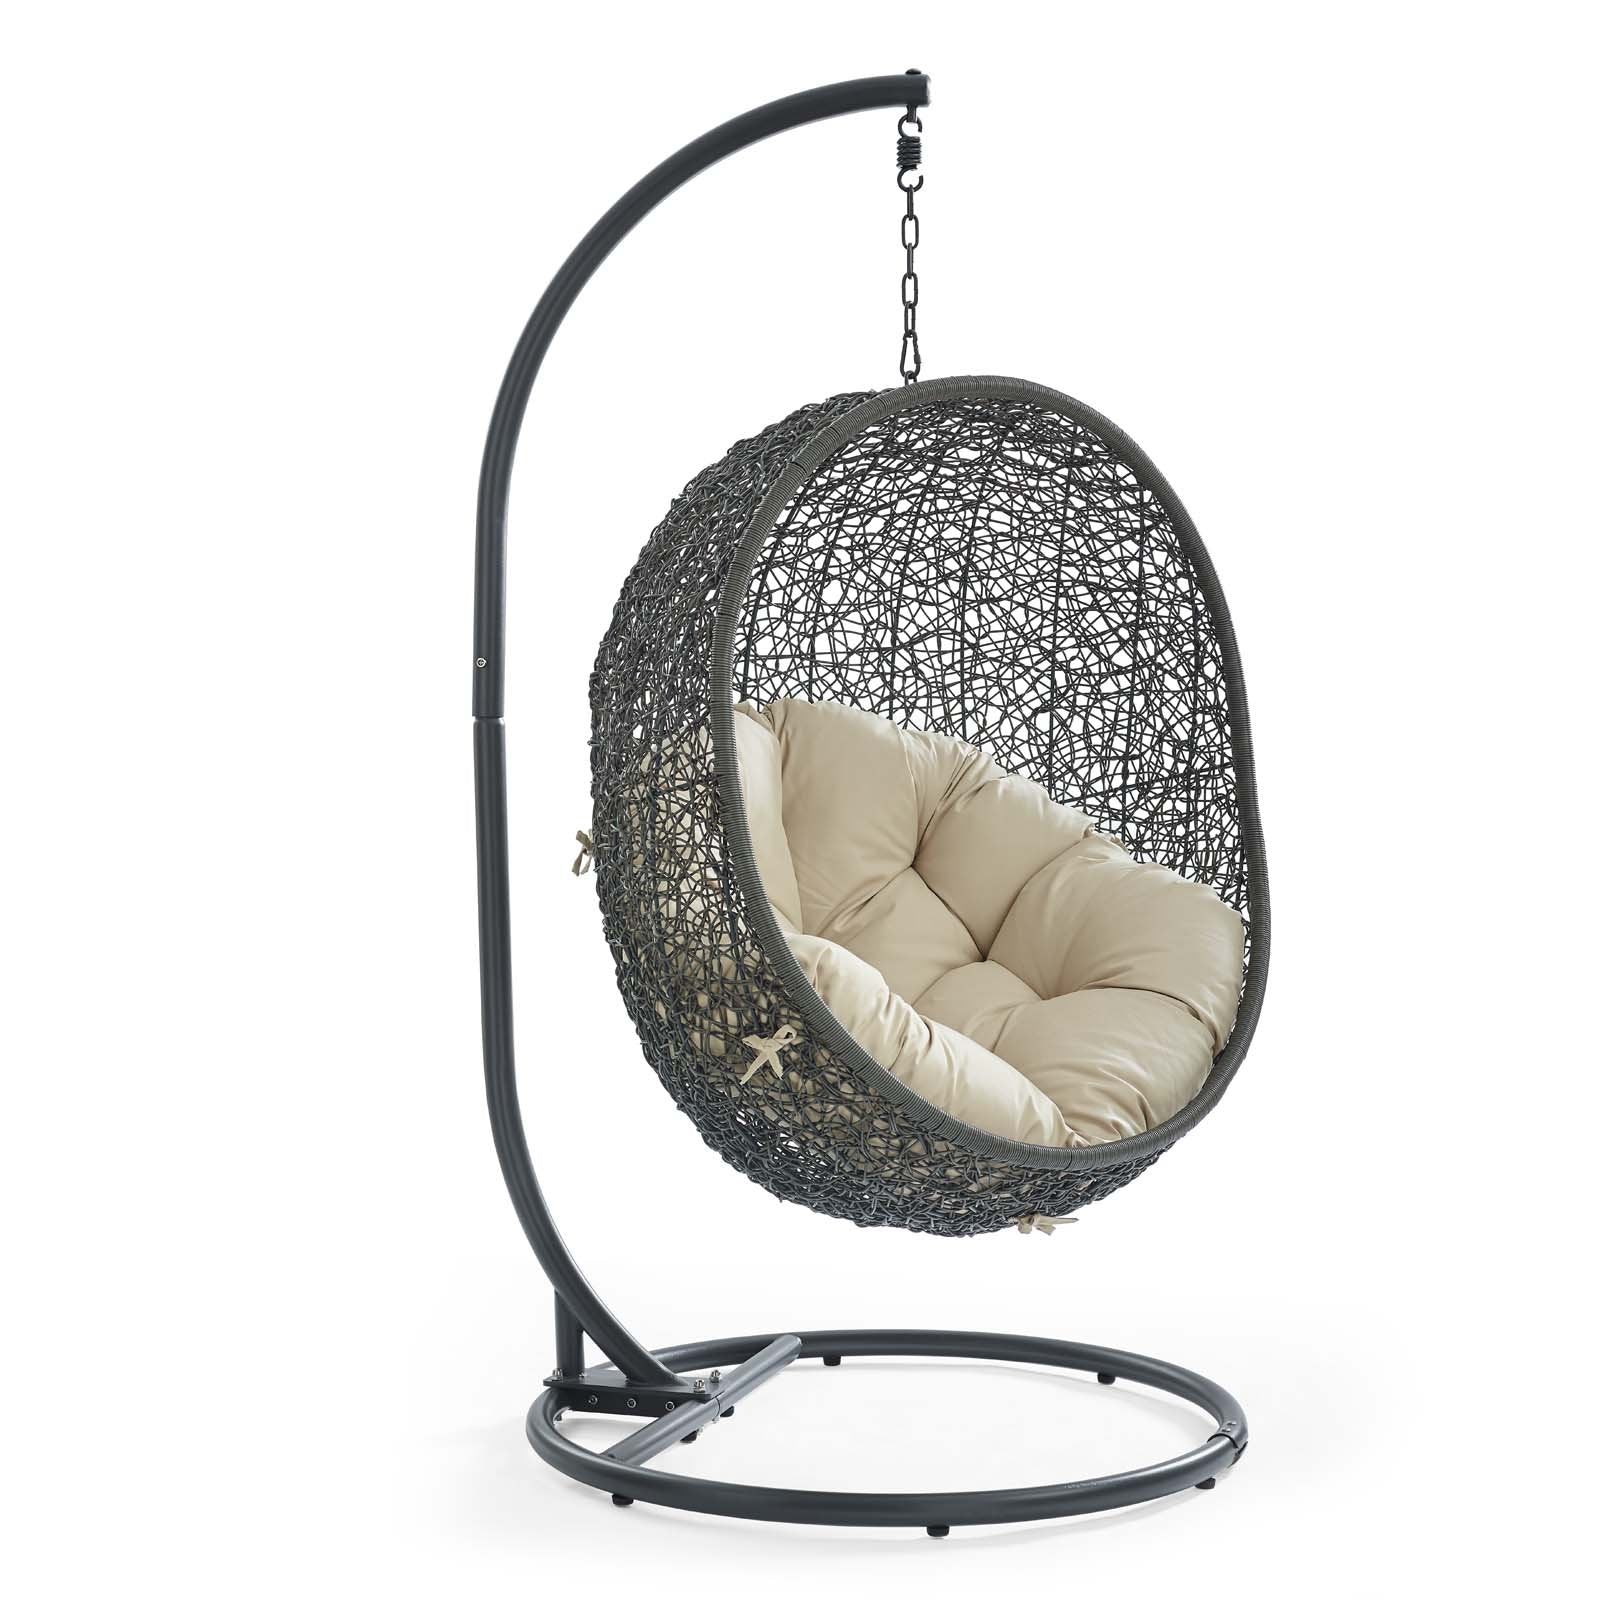 Terrace Egg Shape Hammock Chair With Hanging Kits & Stand - In Multicolor Cushions